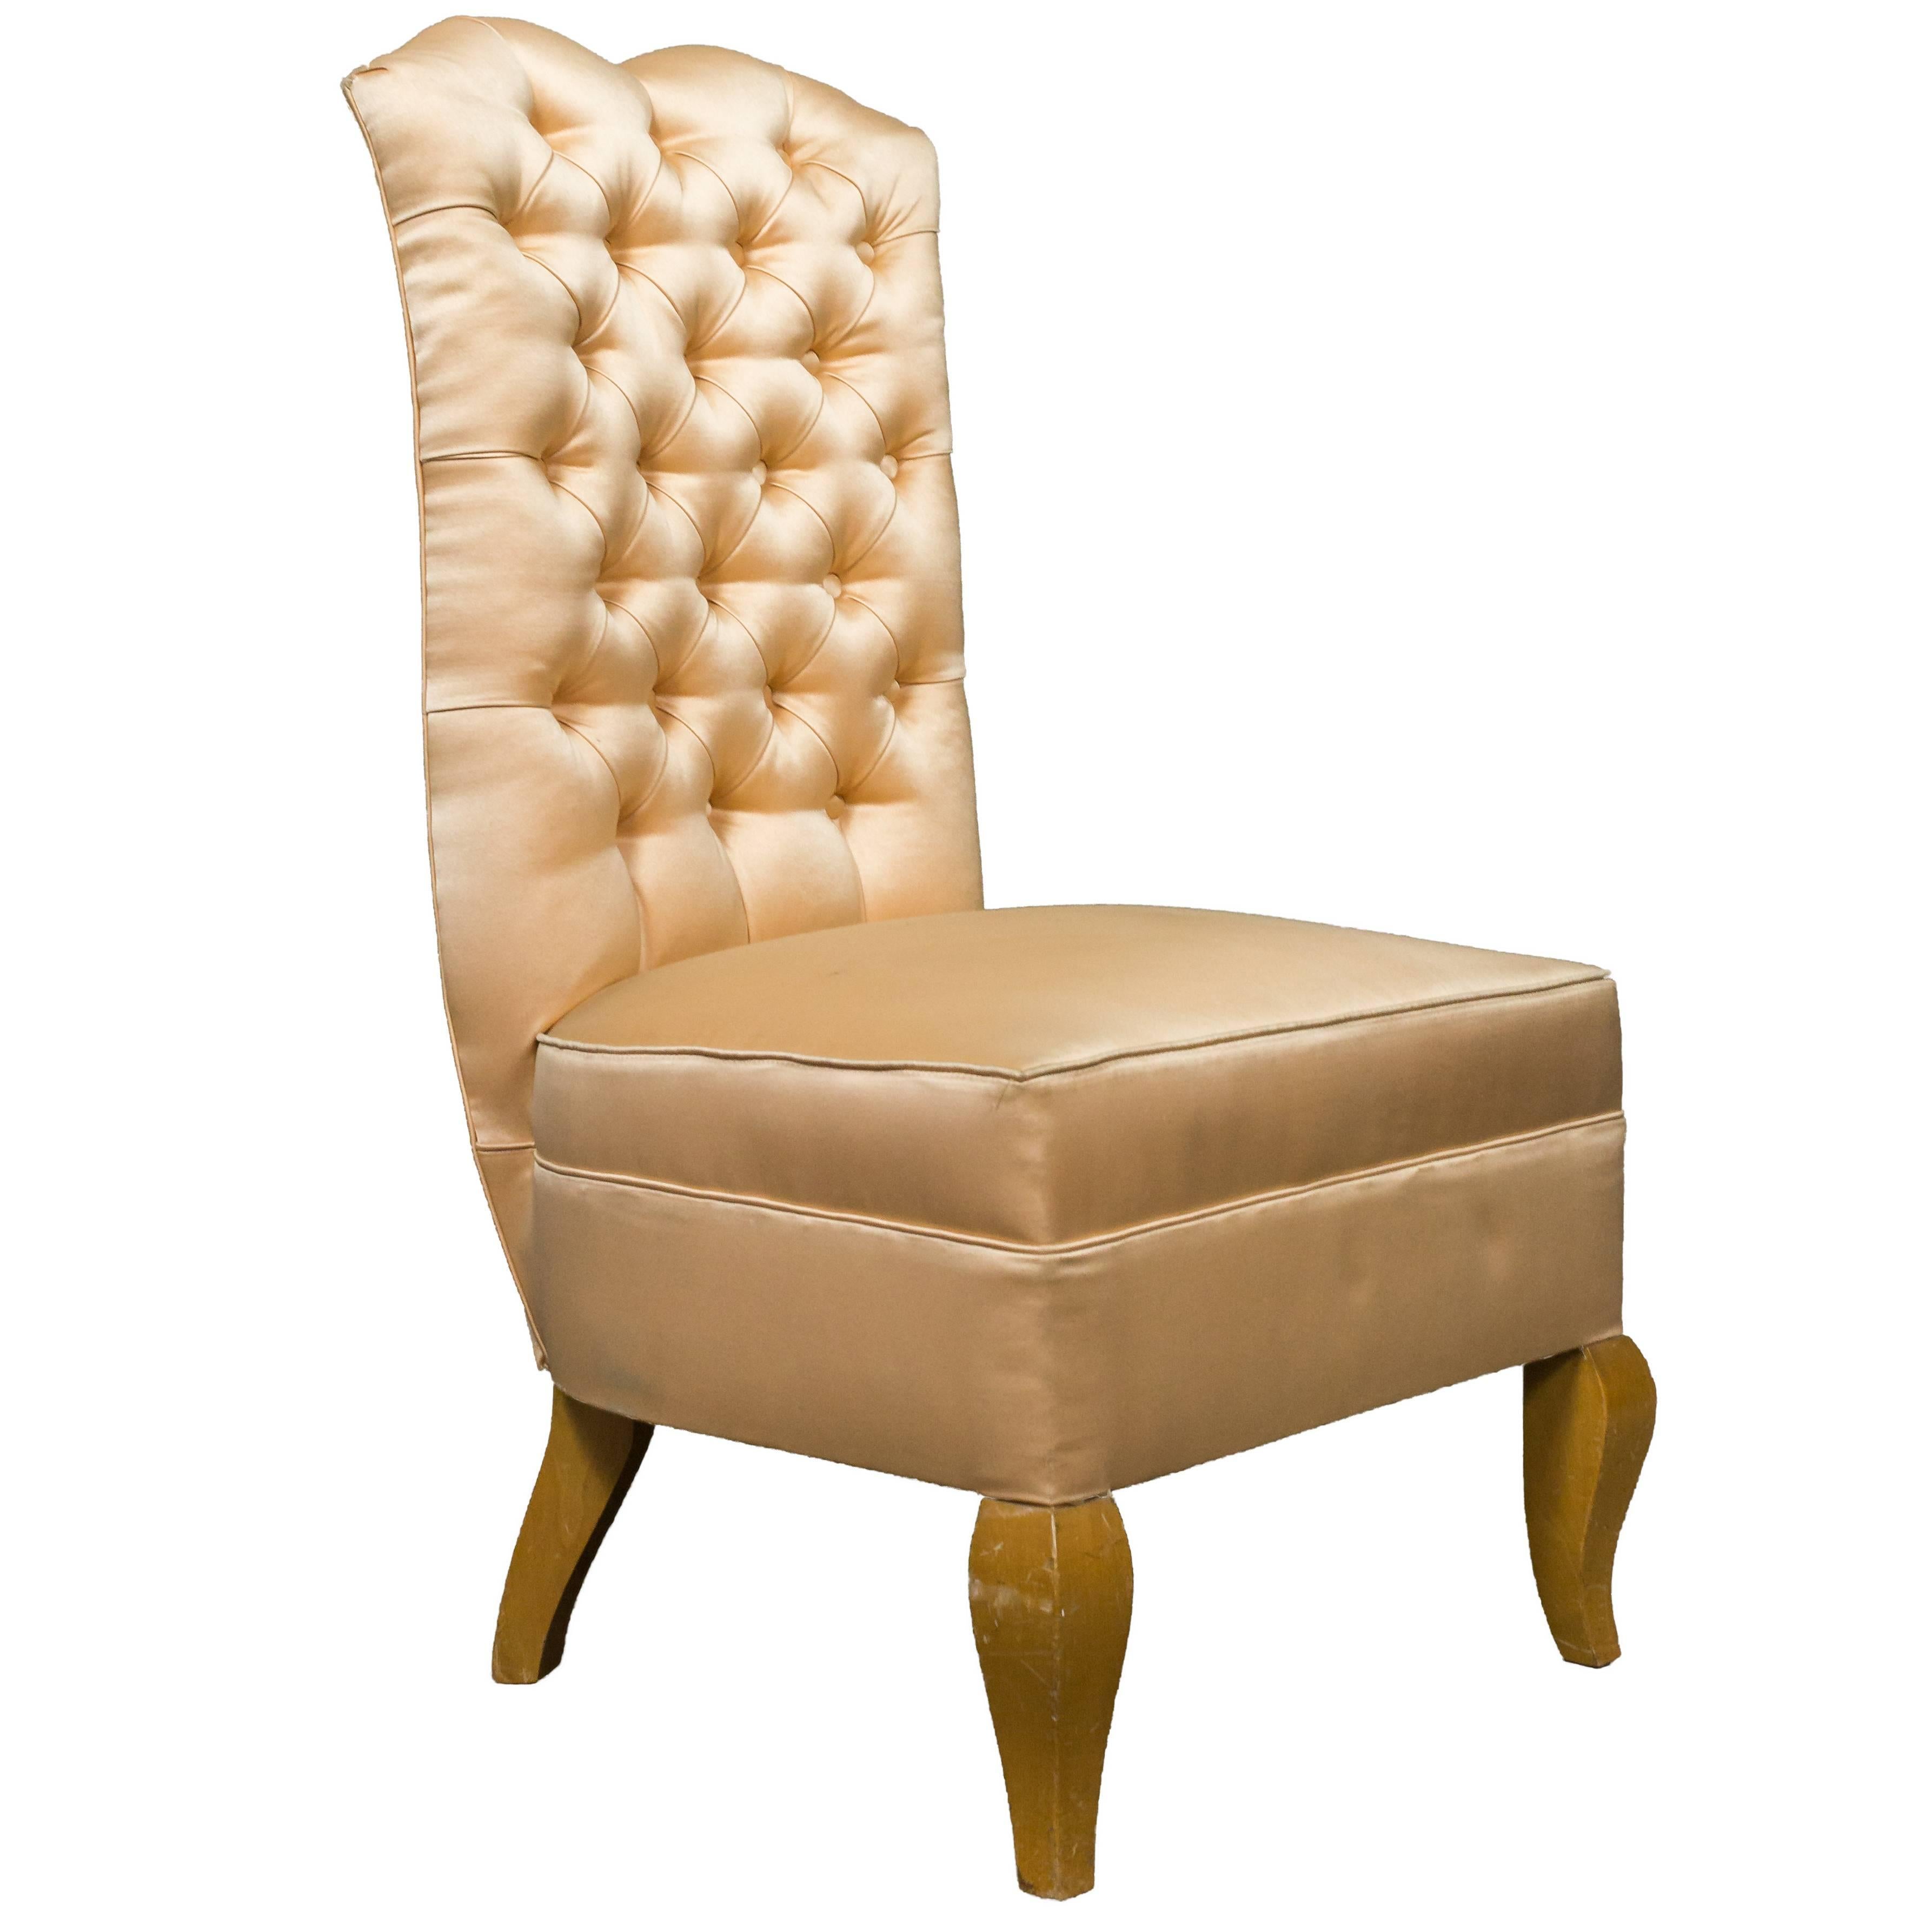 1940s French Tufted Back Slipper Chair For Sale